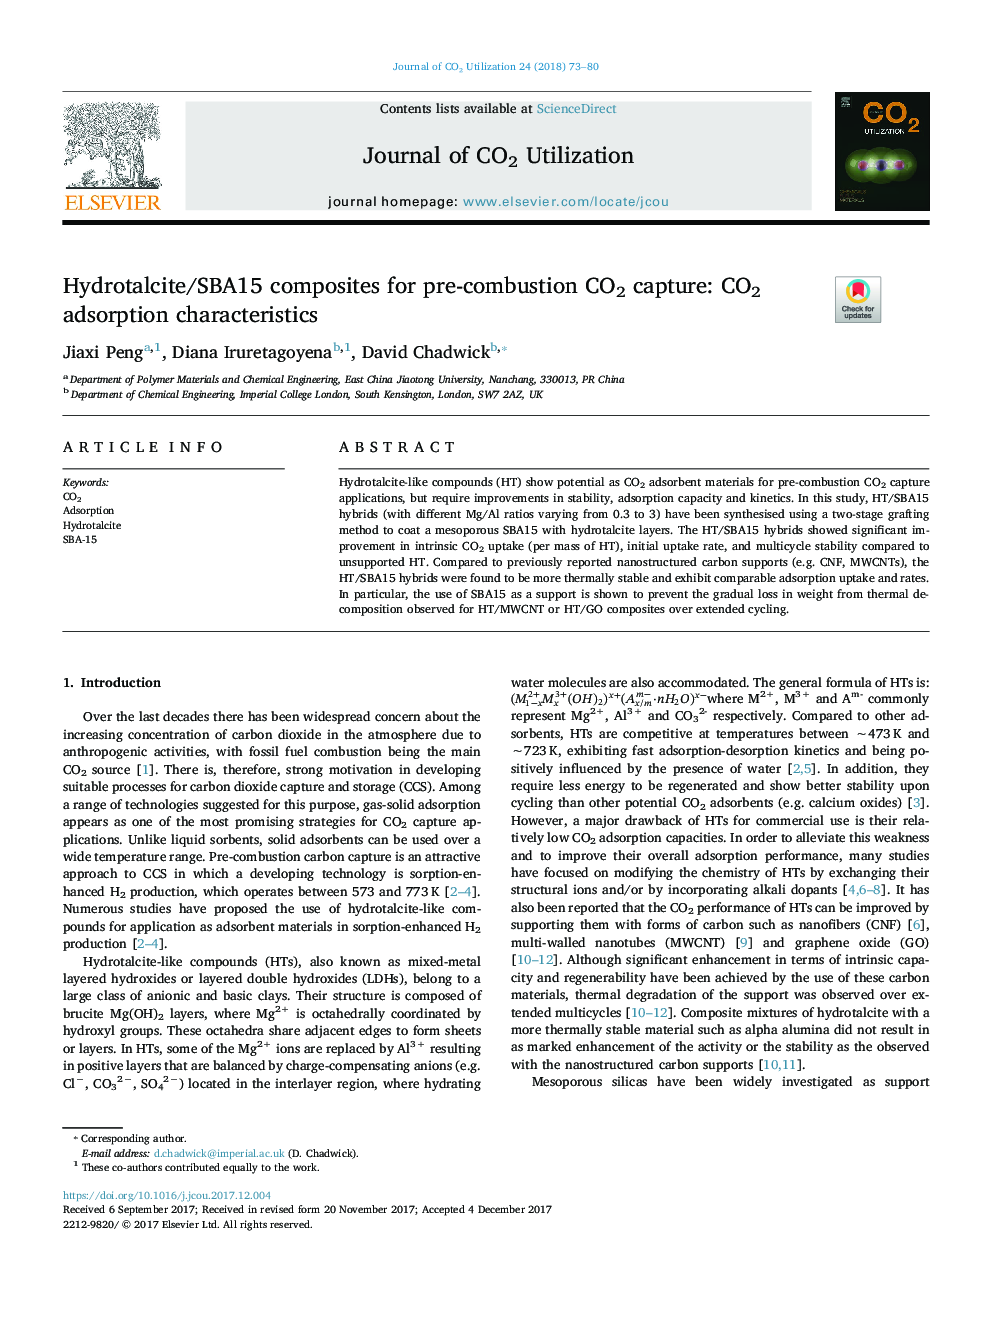 Hydrotalcite/SBA15 composites for pre-combustion CO2 capture: CO2 adsorption characteristics